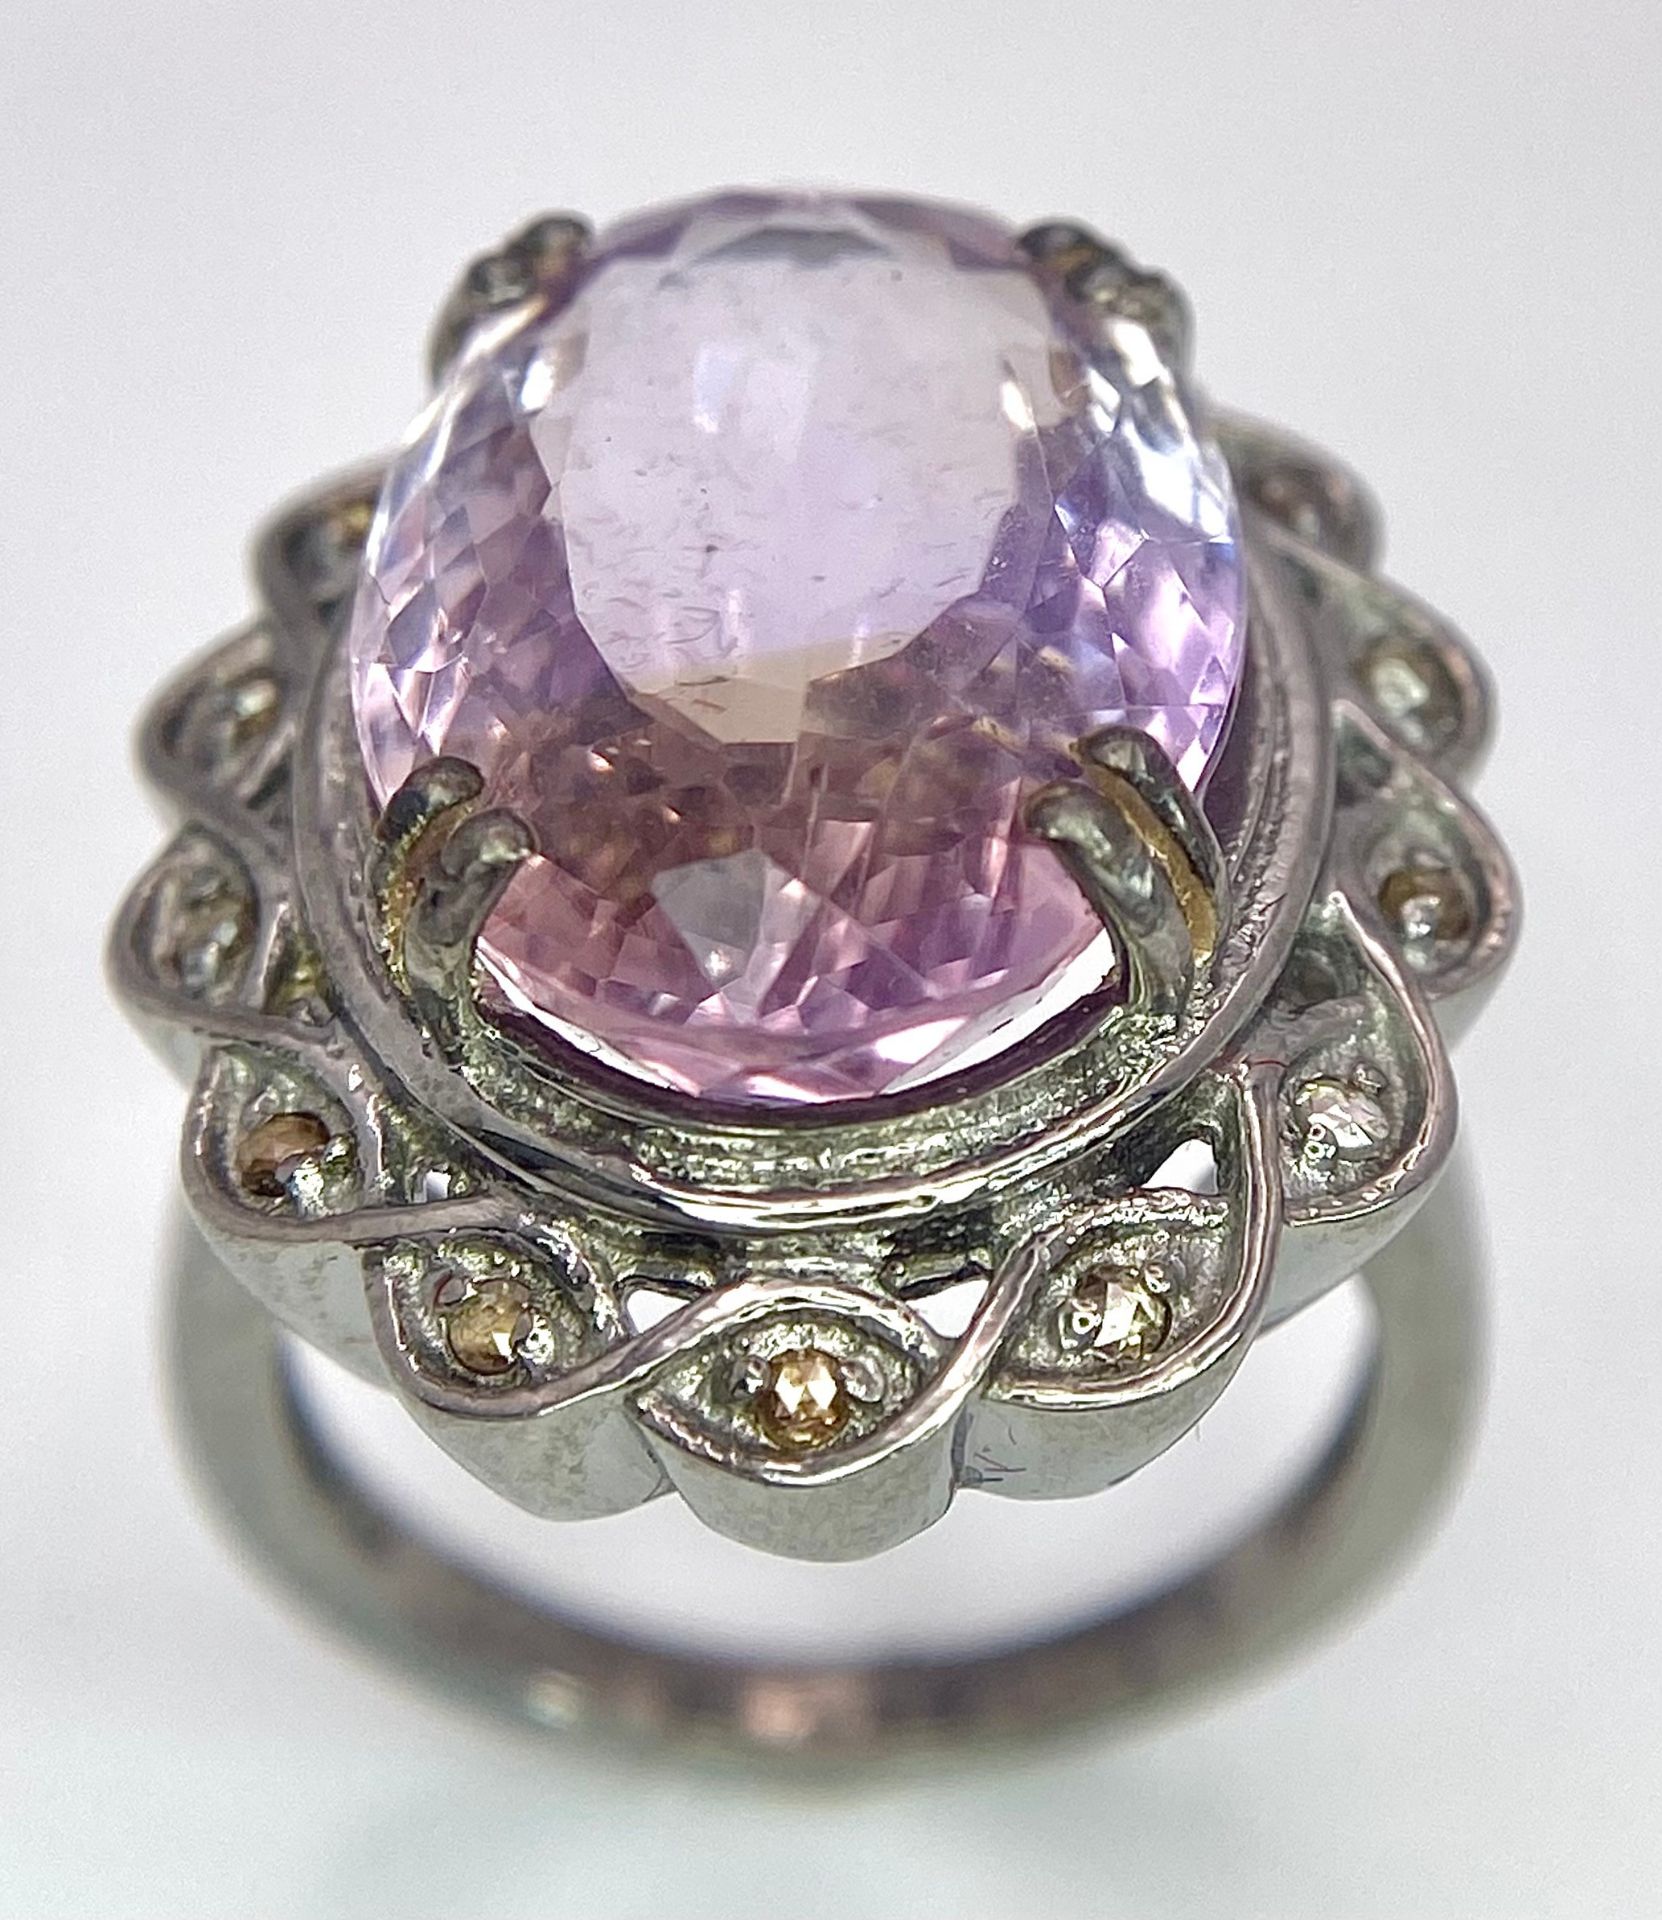 An 11.65ct Amethyst Ring with 0.25ctw of Diamond Accents. Set in 925 Silver. Size N. 9.4g total - Image 2 of 6